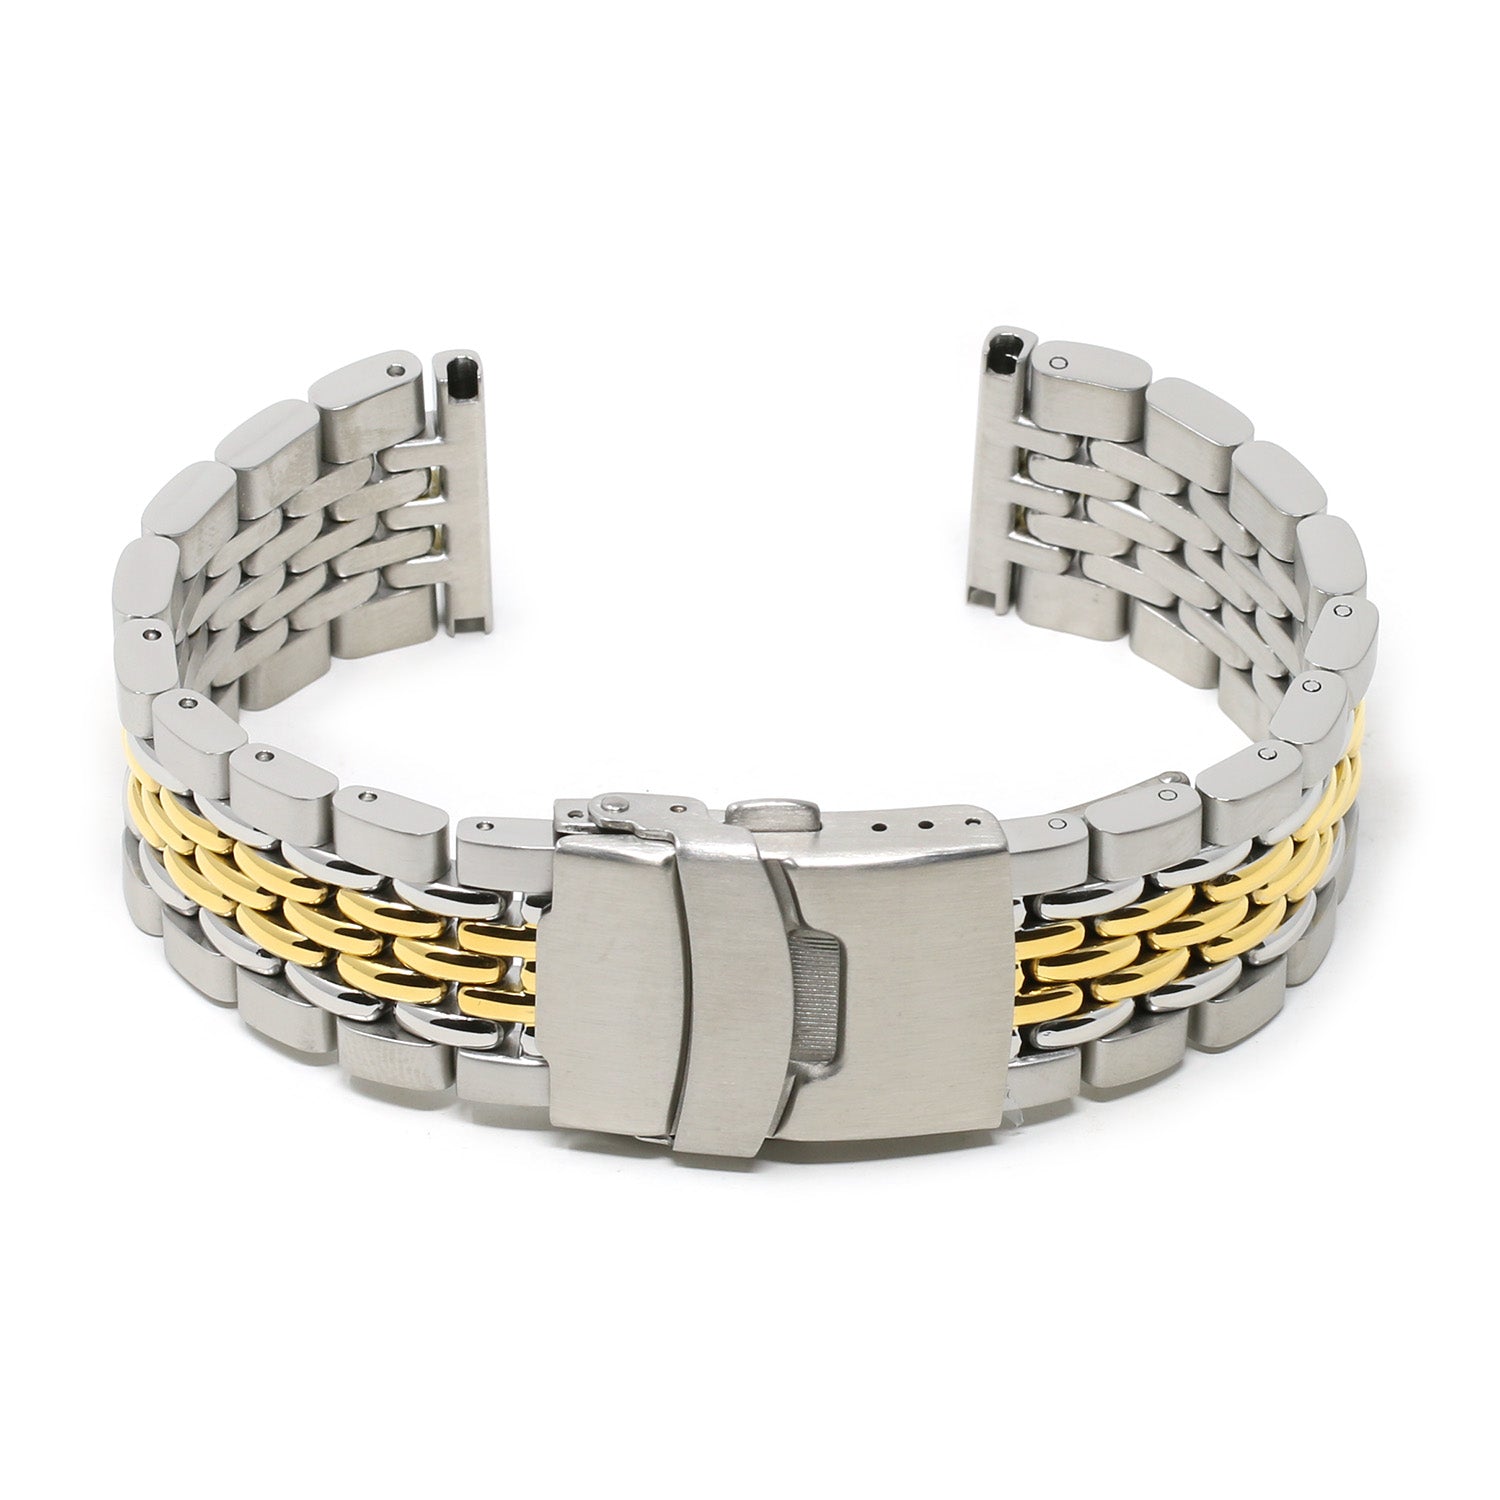 http://northstreetwatch.com/cdn/shop/products/m.bd1_.2t-Main-Two-Tone-StrapsCo-Stainless-Steel-Beads-of-Rice-Watch-Band-Strap-Bracelet_4a491fde-dc84-44e2-b549-c3394cdc2e66.jpg?v=1644453524